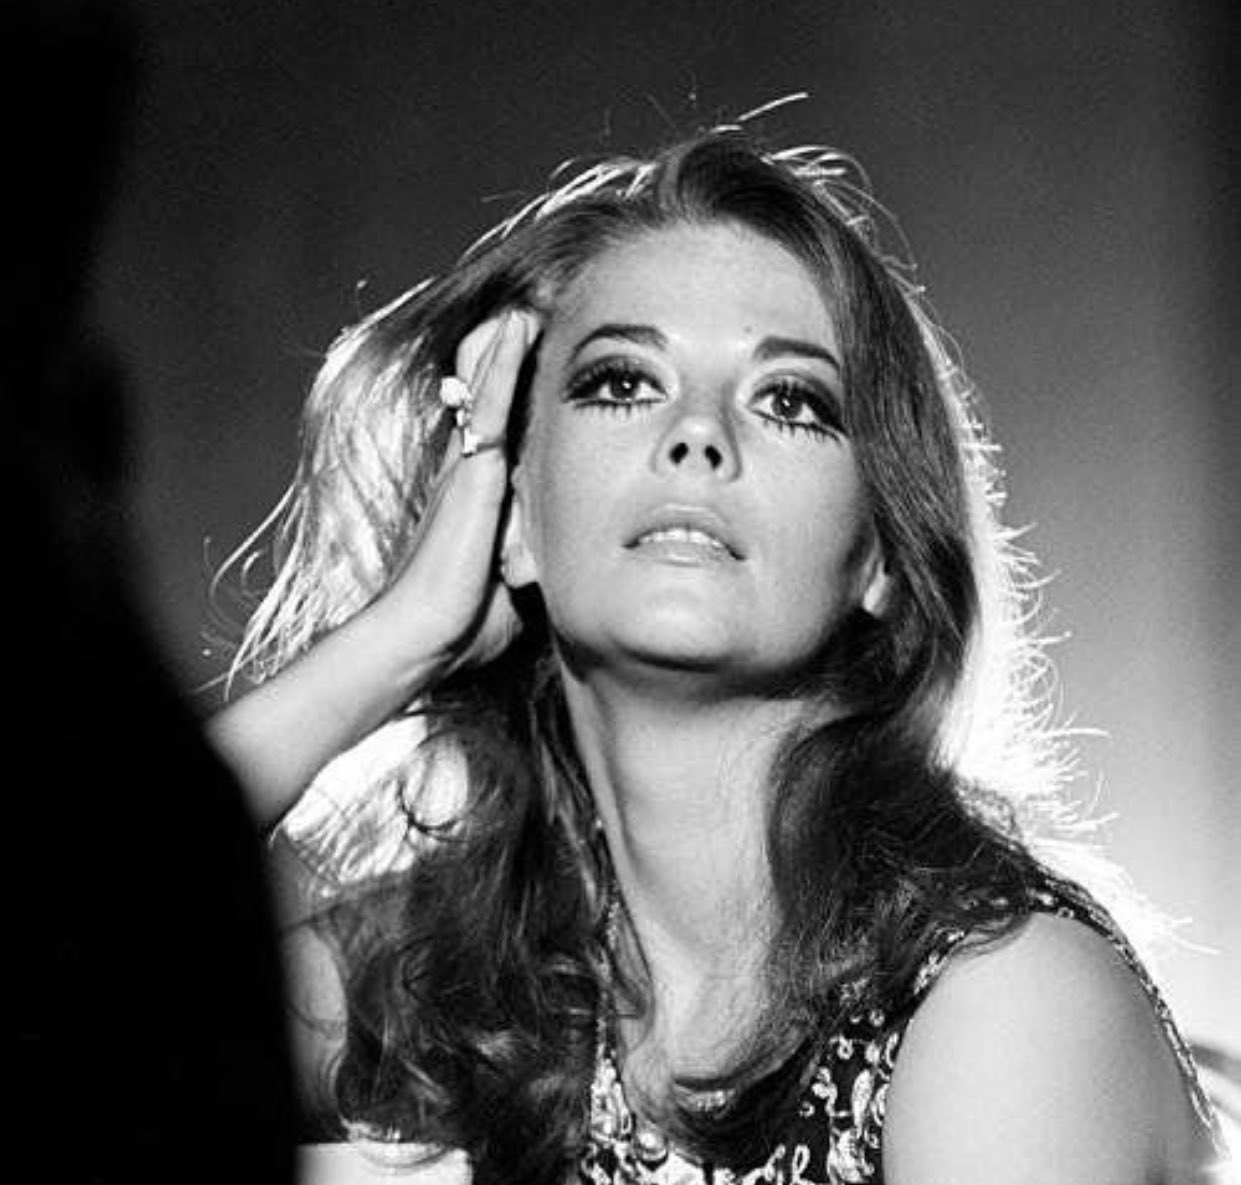 Happy birthday to my stunning role model natalie wood an acting mogul and fashion icon, a queen  